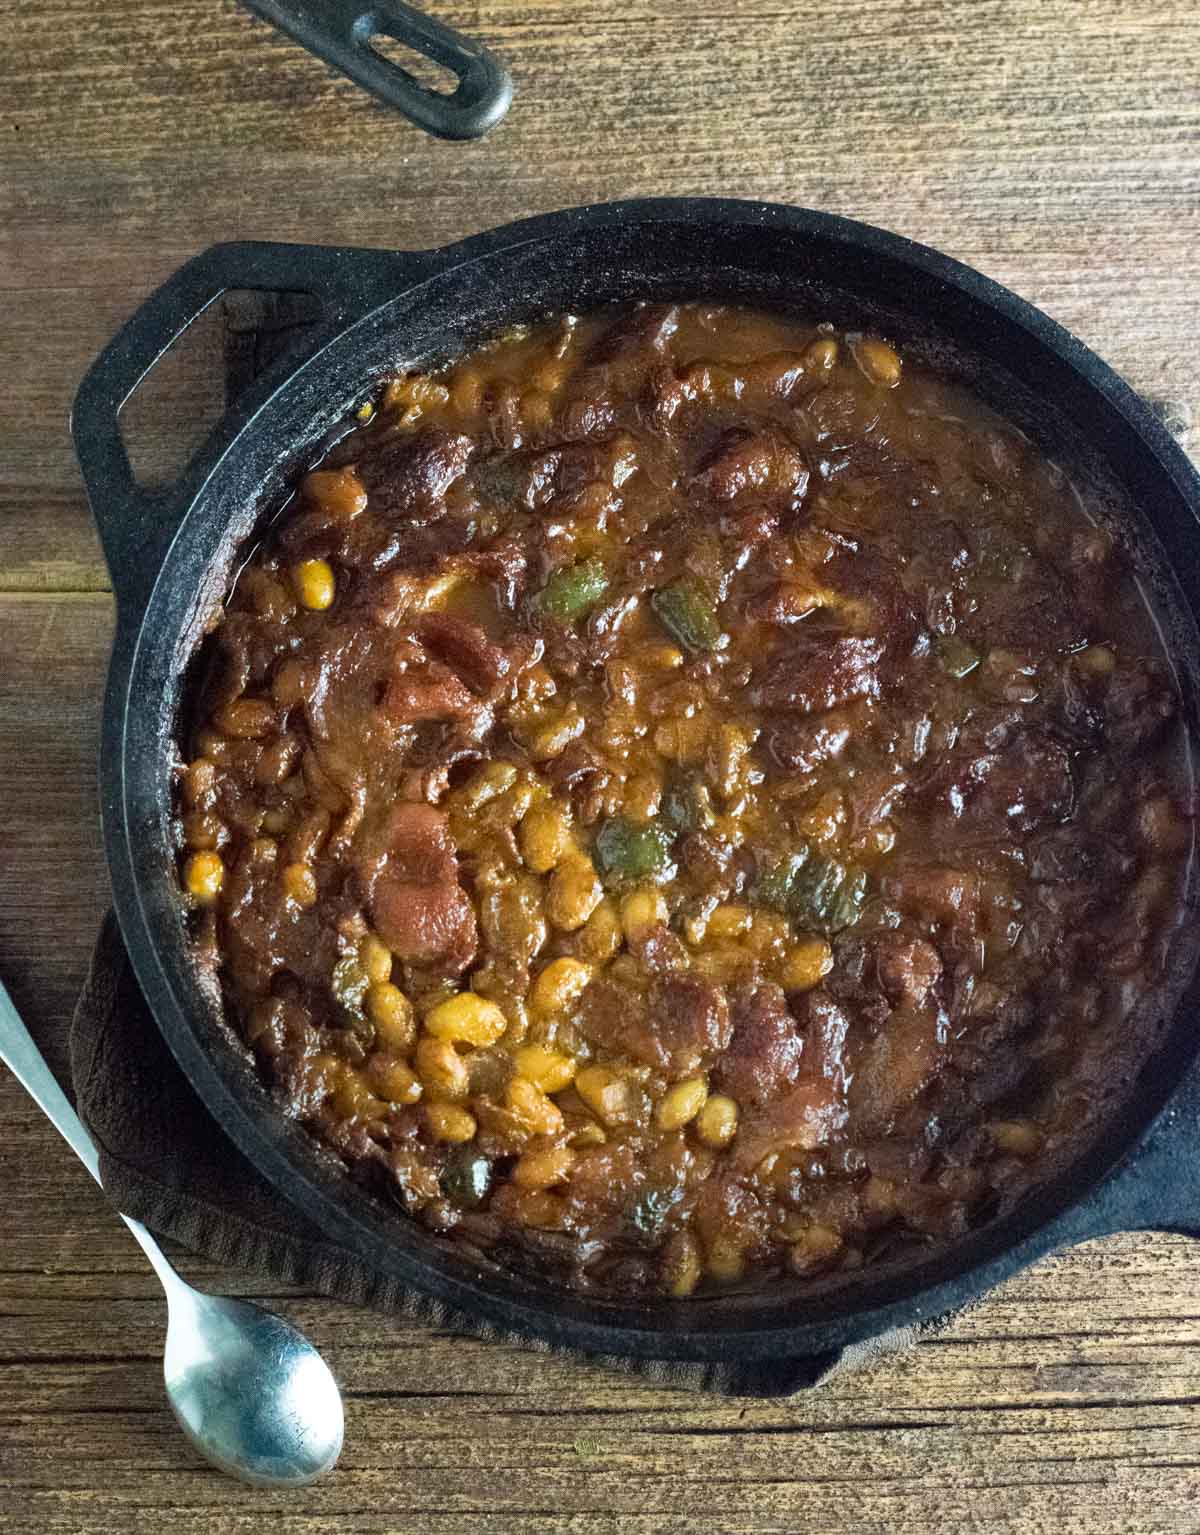 Pot of grilled Baked Beans resting on wooden board.